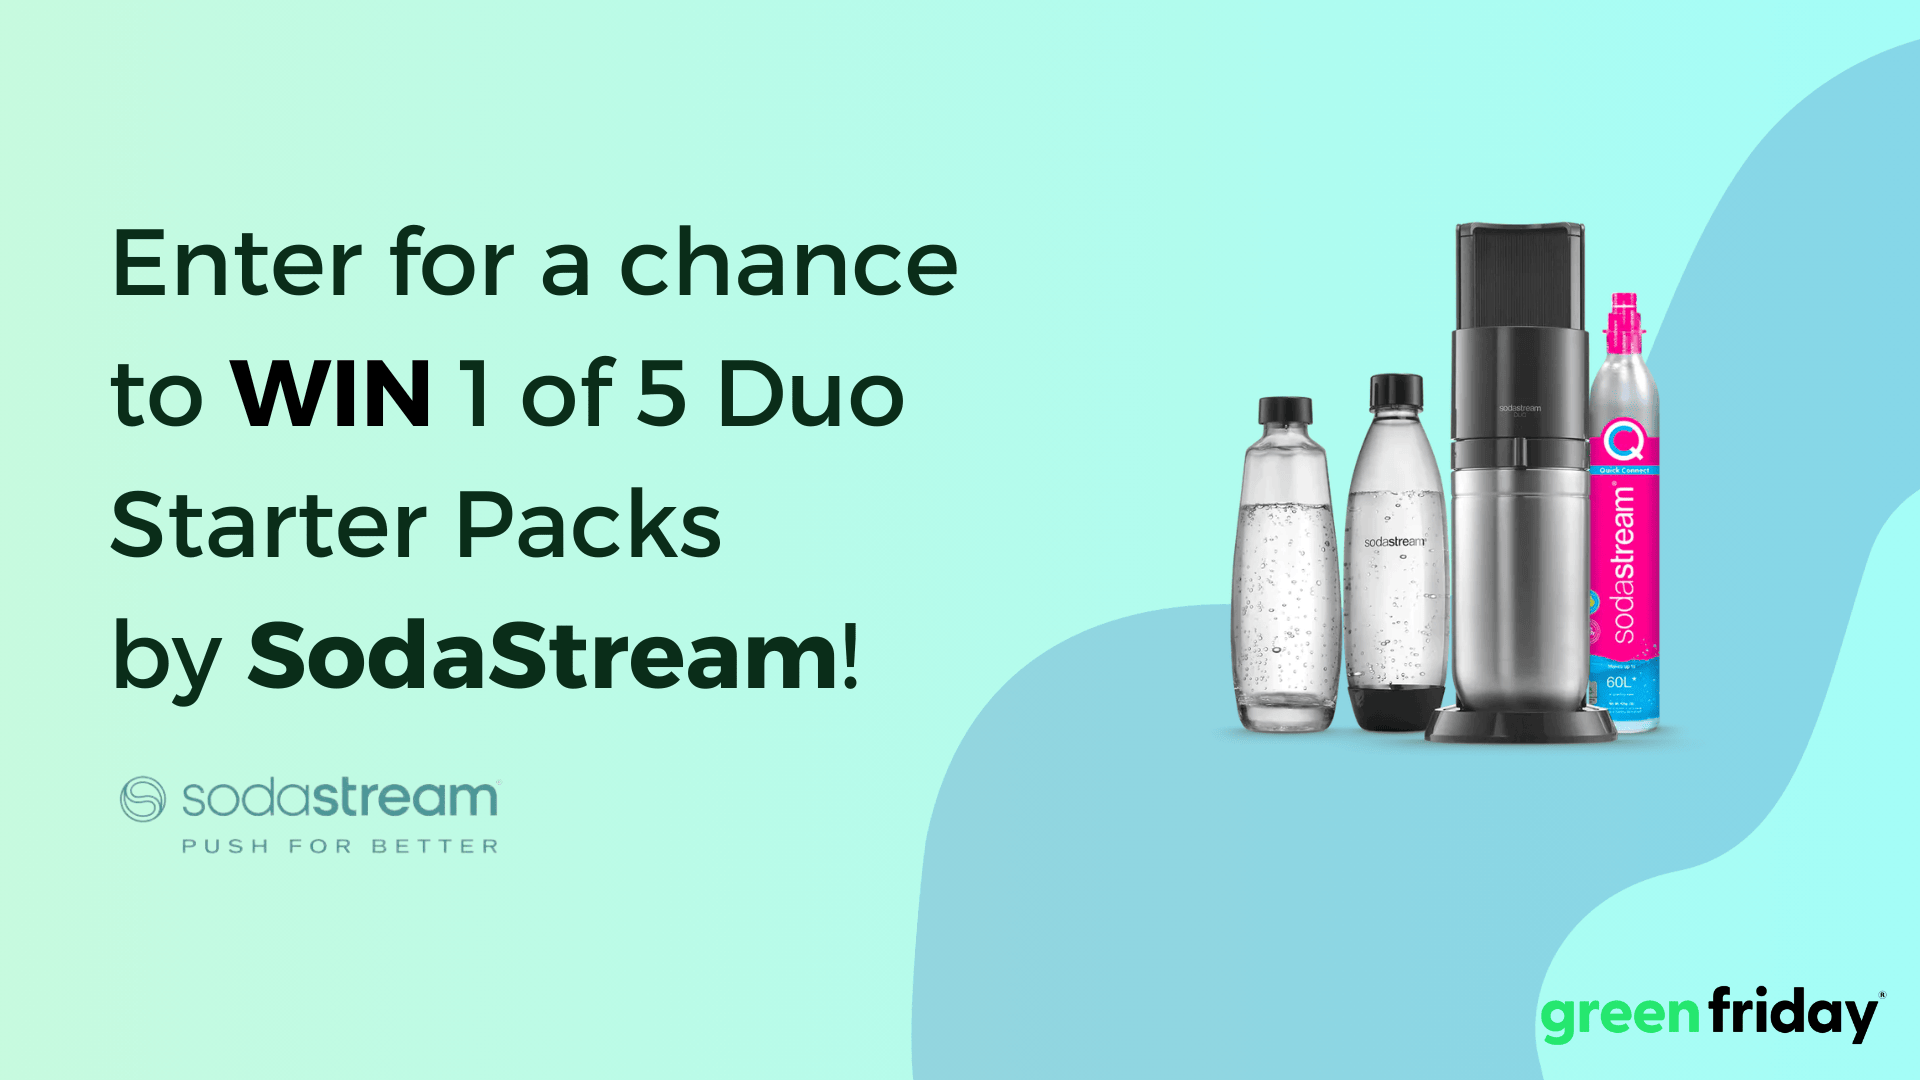 Enter for you chance to WIN 1 of 5 SodaStream DUO Starter Packs! (Valued at $780)